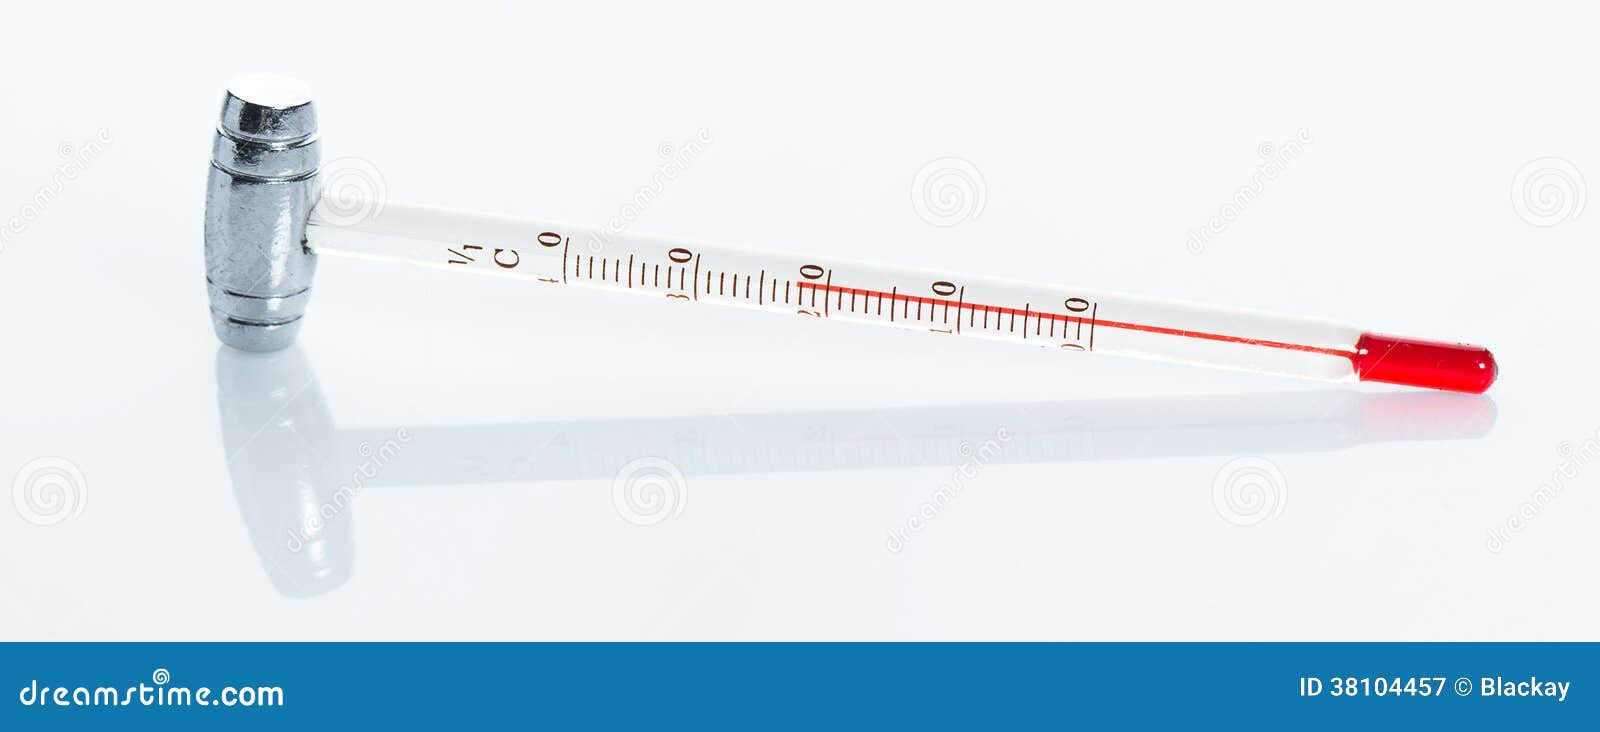 Wine thermometer stock image. Image of bottle, closeup - 38104457